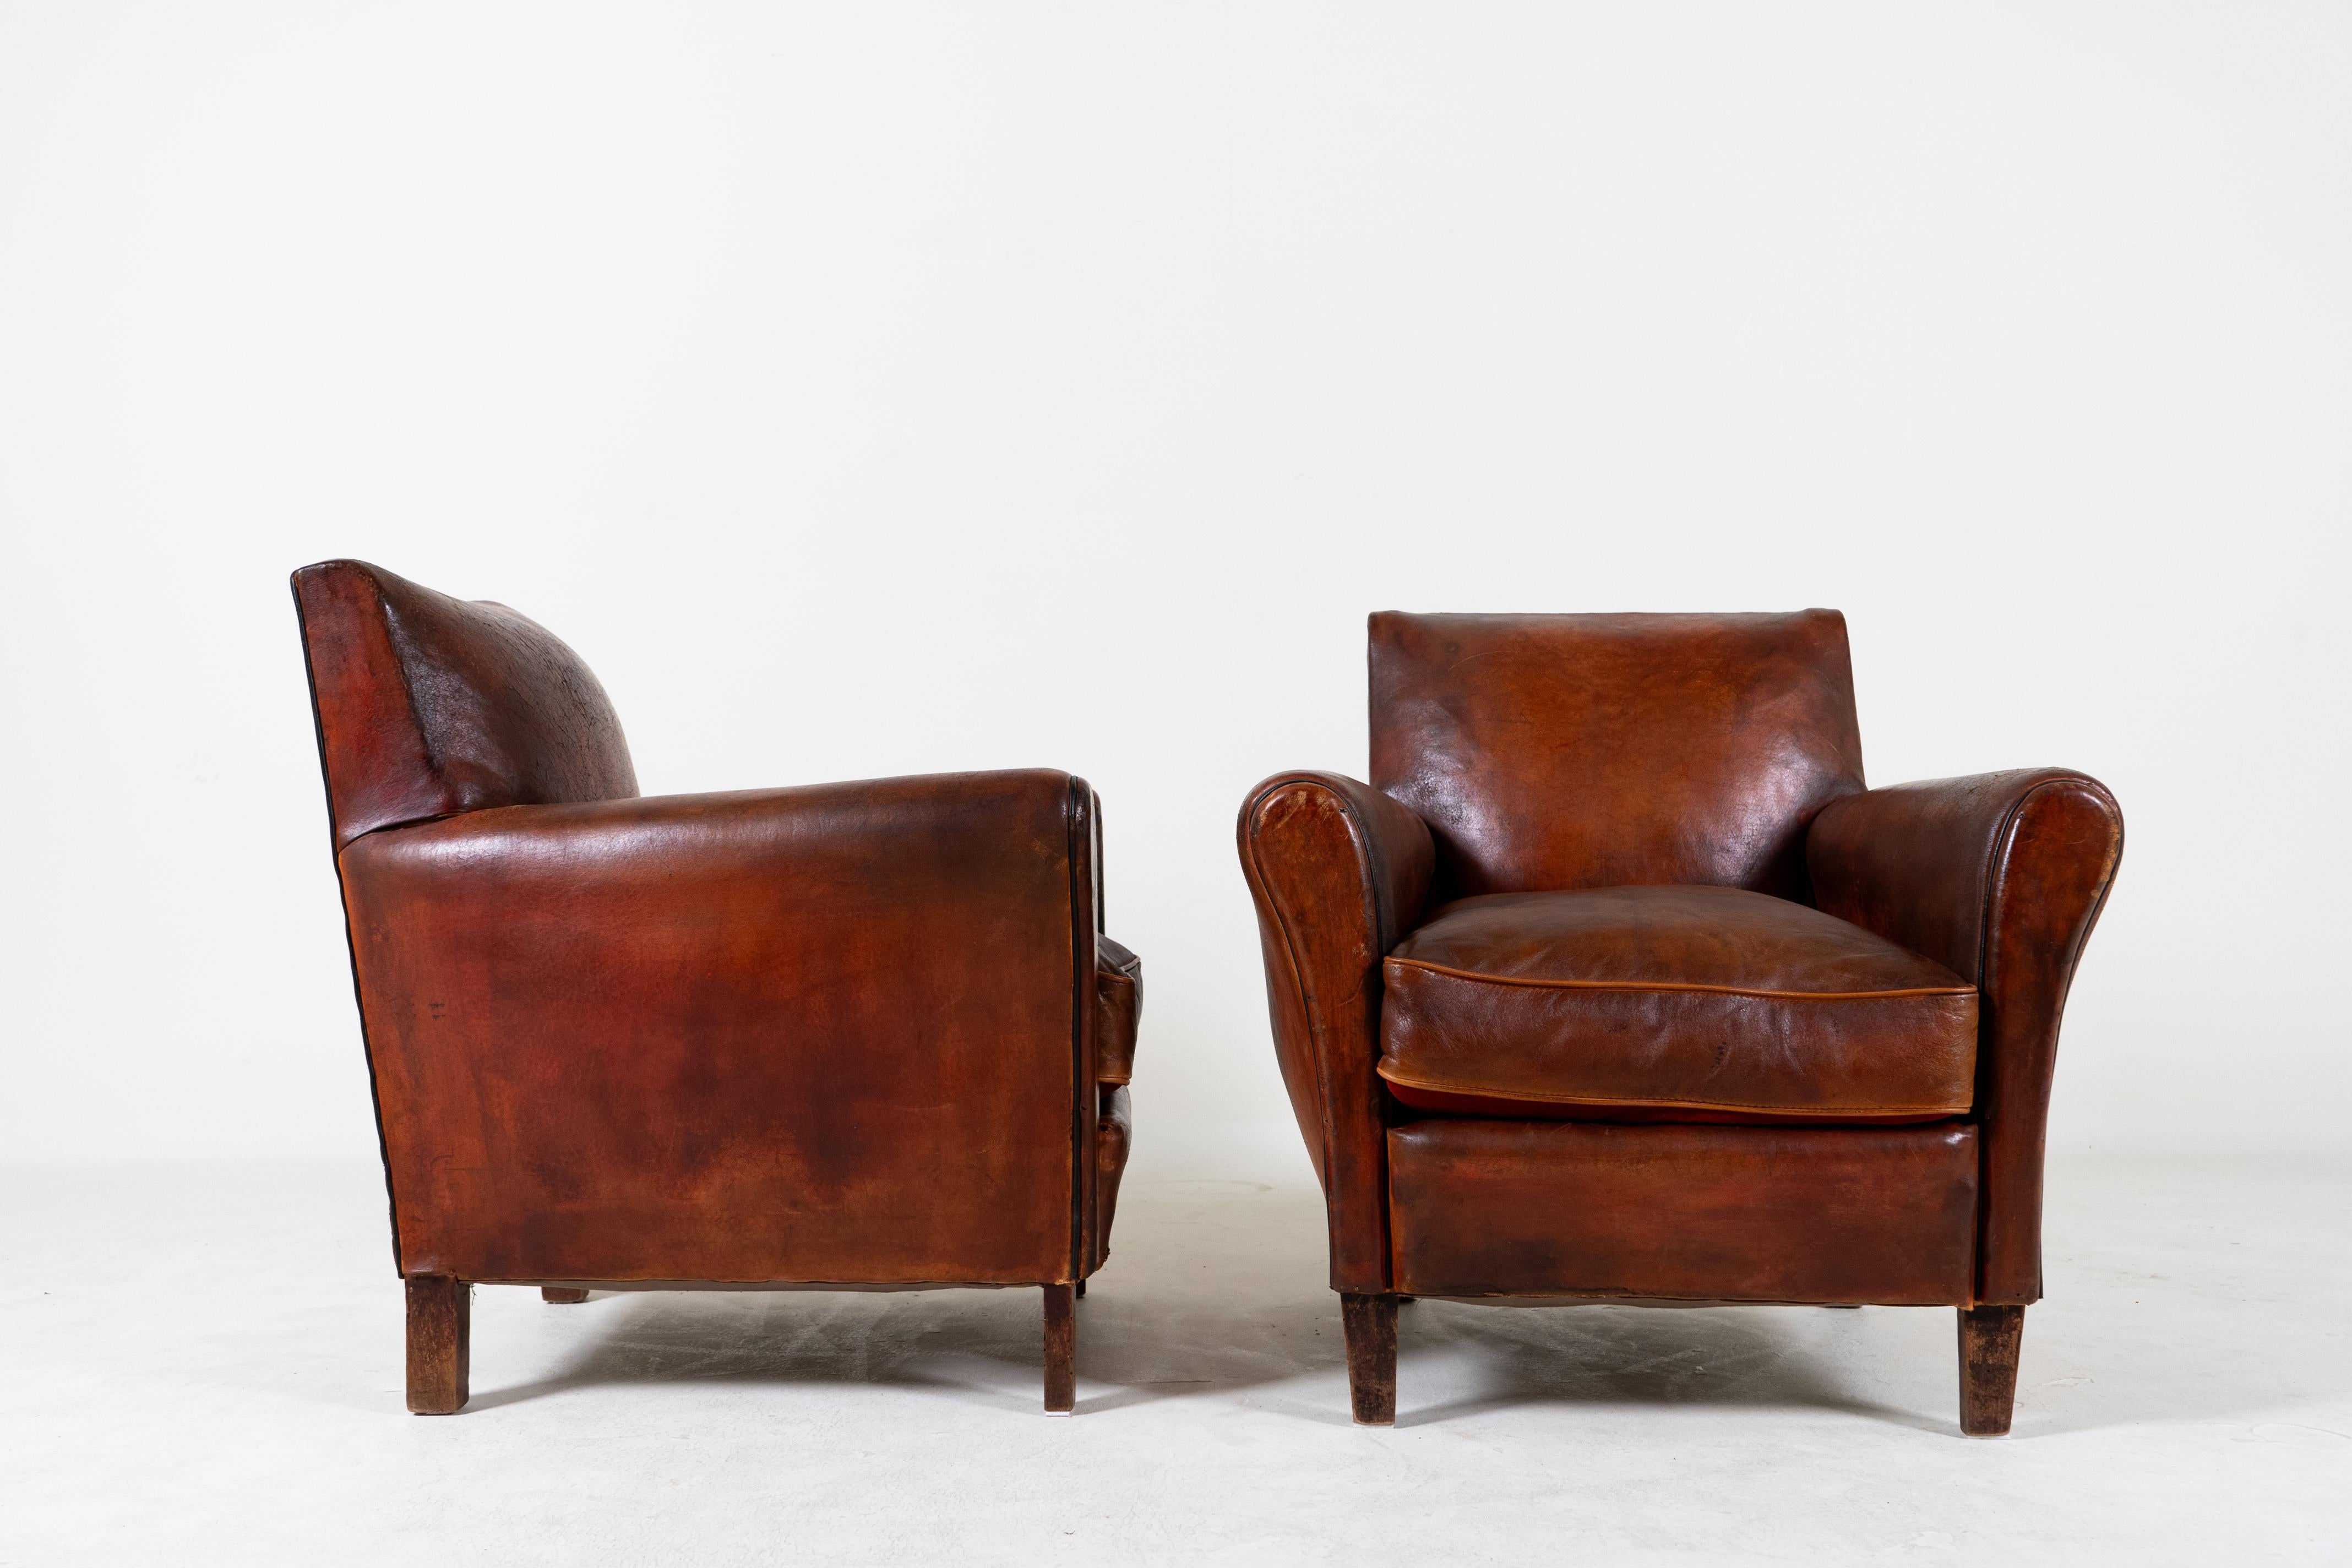 This pair of vintage French Art Deco club chairs dates to the height of pre-war modern design. While many furniture pieces of the Art Deco period are rounded and streamlined, these chairs feature some rectilinear angles on the arms and front feet